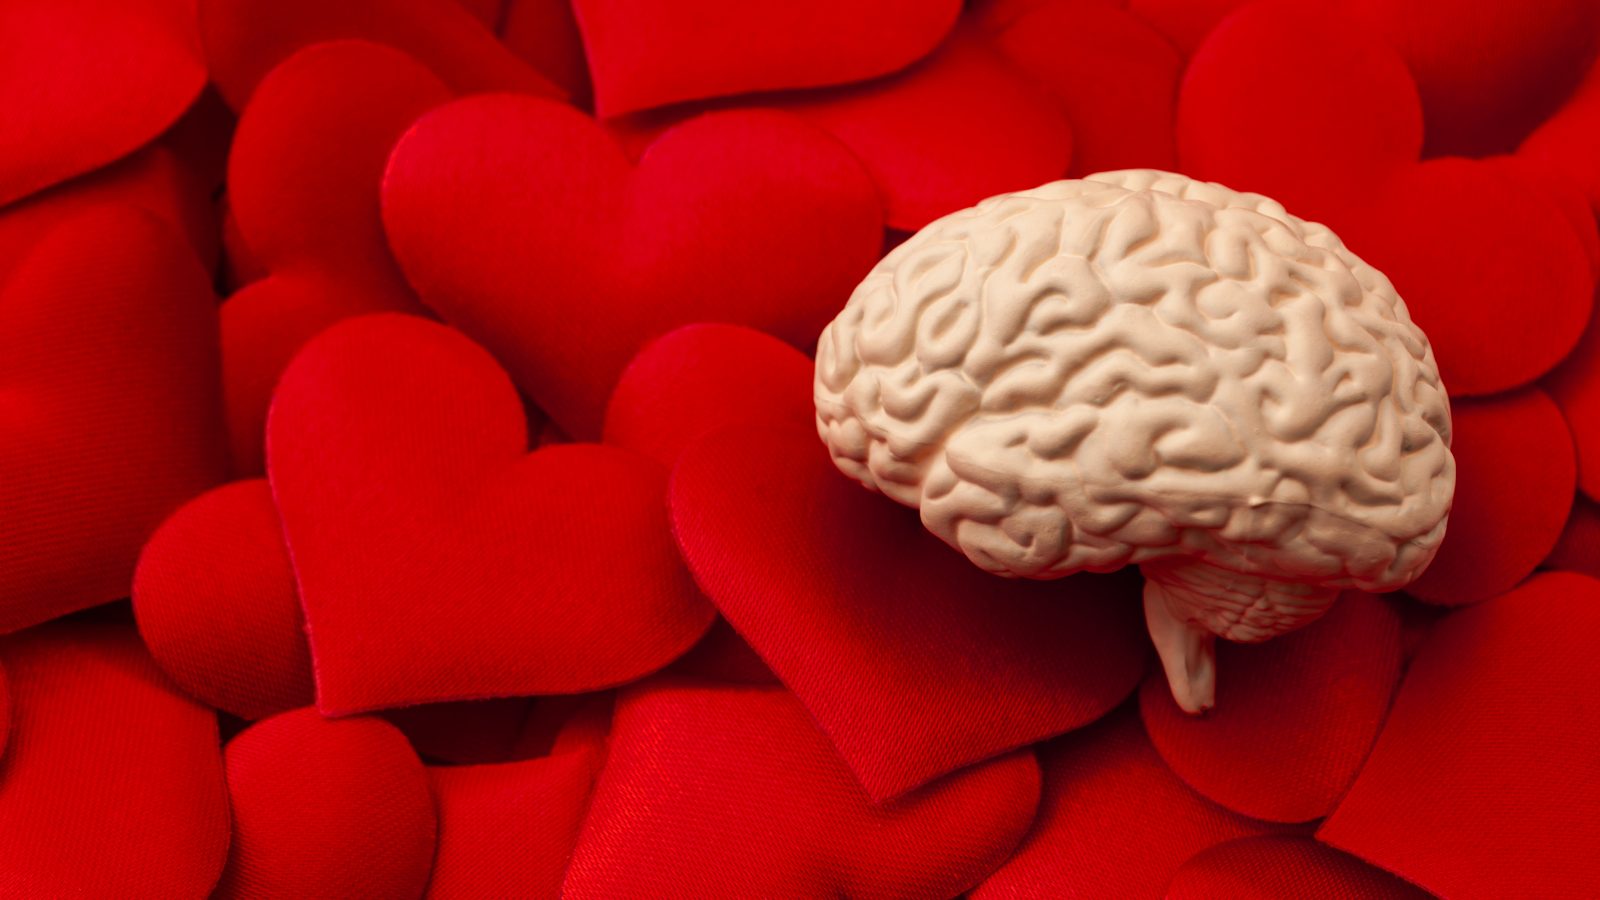 Model human brain with red hearts in the background